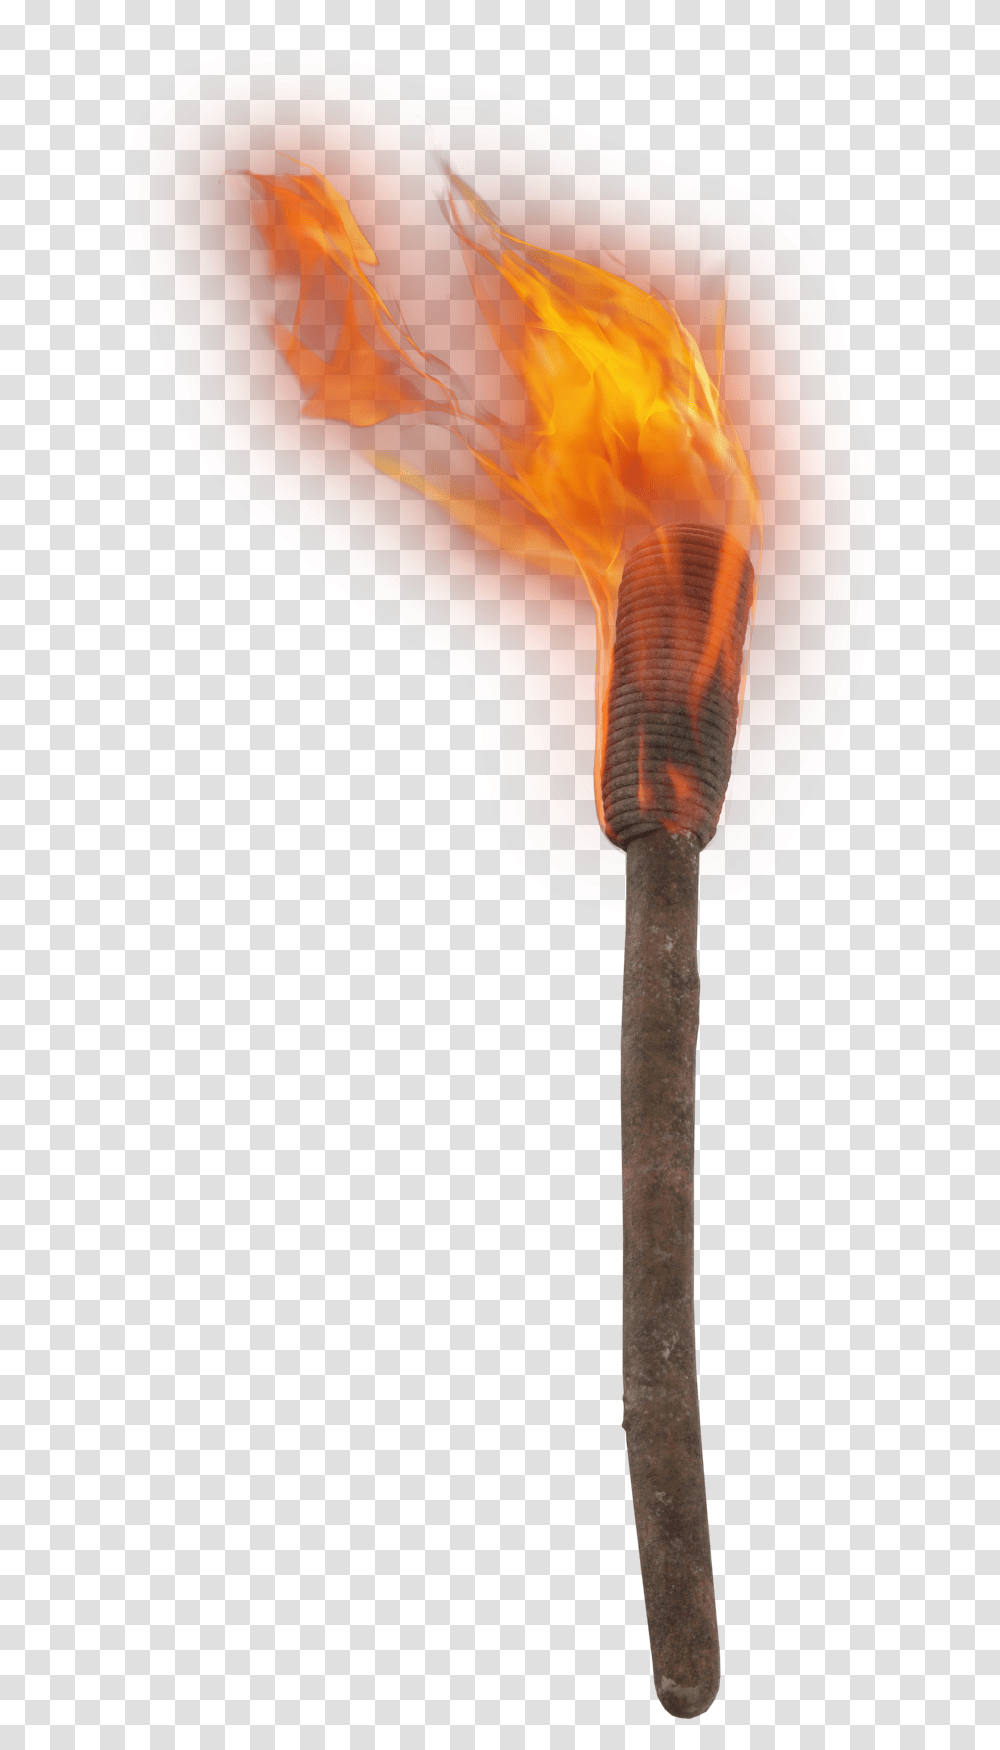 Hand Torch Image For Free Download Flame, Sphere, Light, Clothing, Helmet Transparent Png